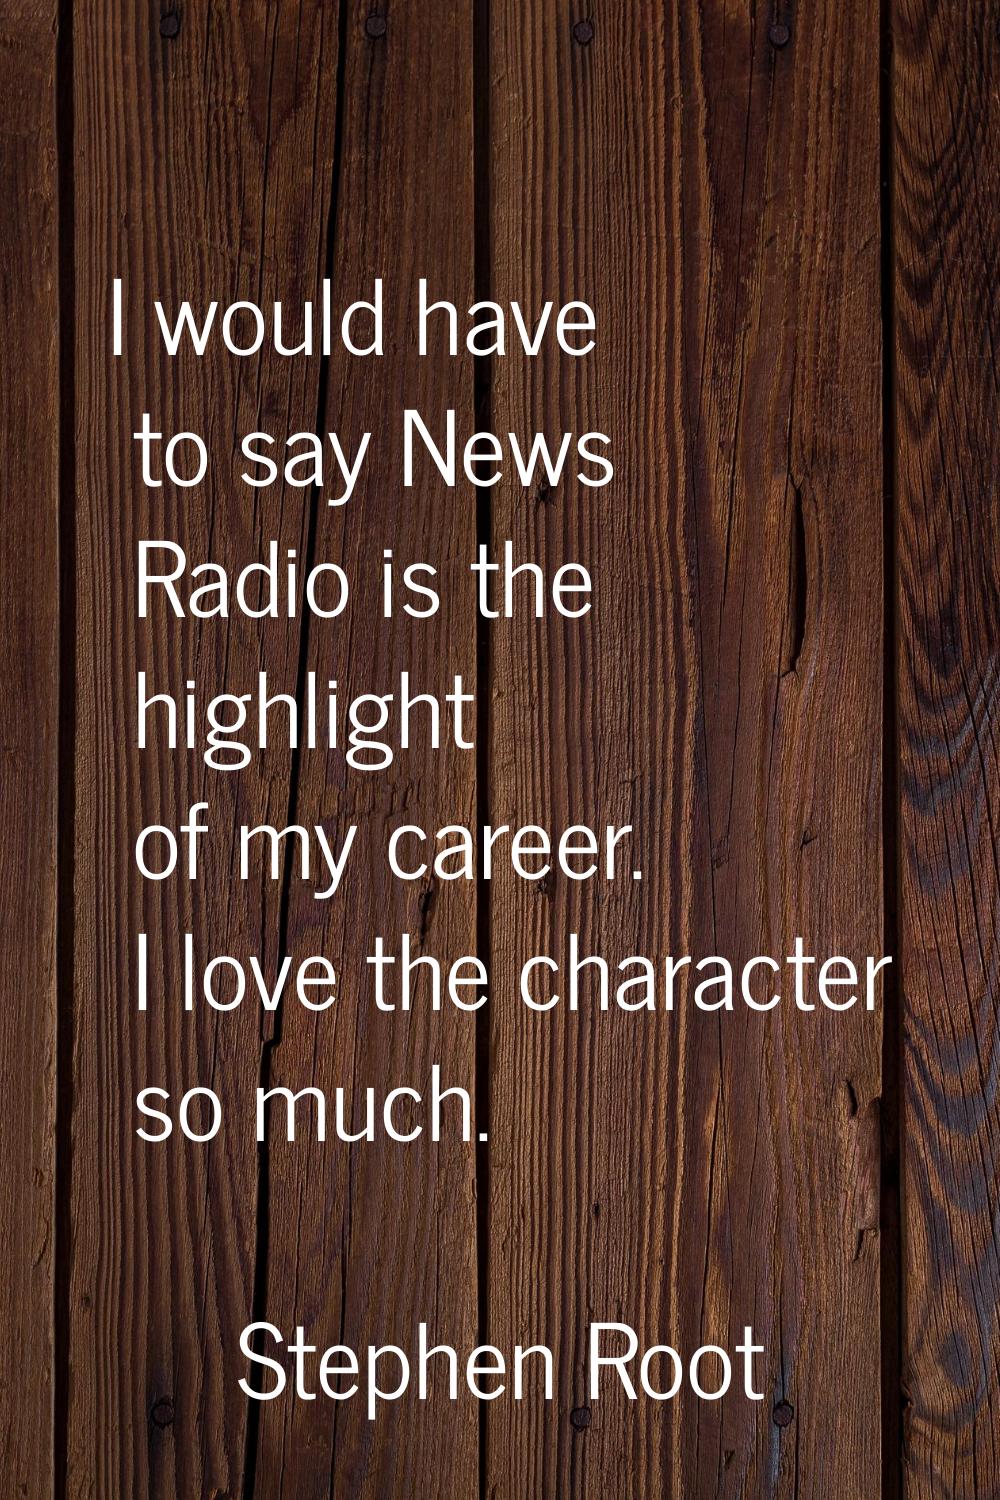 I would have to say News Radio is the highlight of my career. I love the character so much.